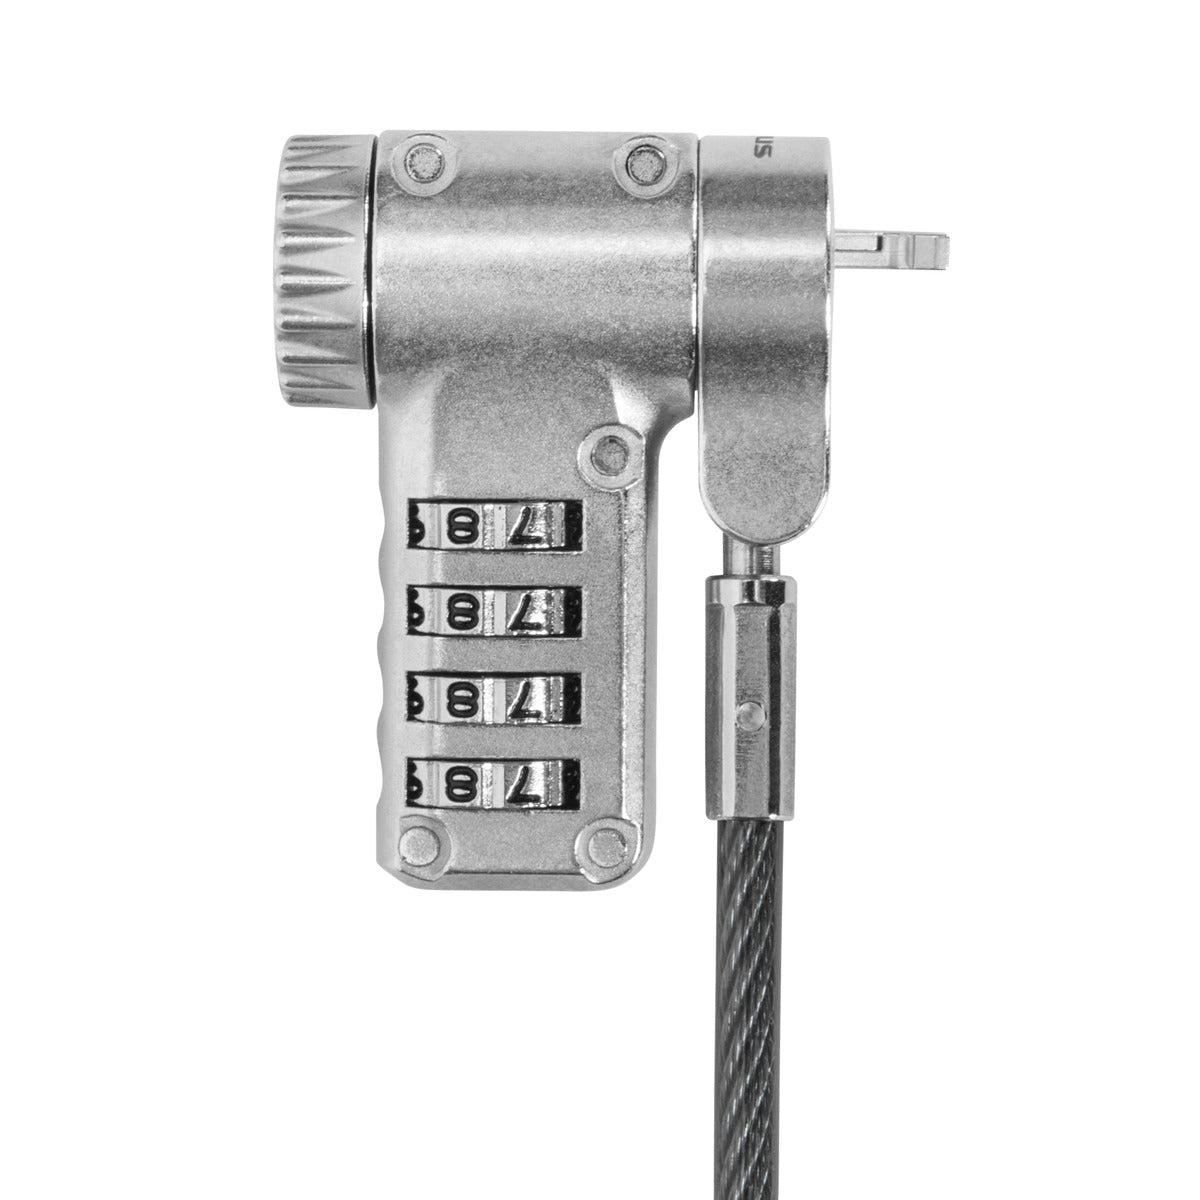 Ultimate Universal Serialised Combination Cable Lock With Adaptable Lock Head